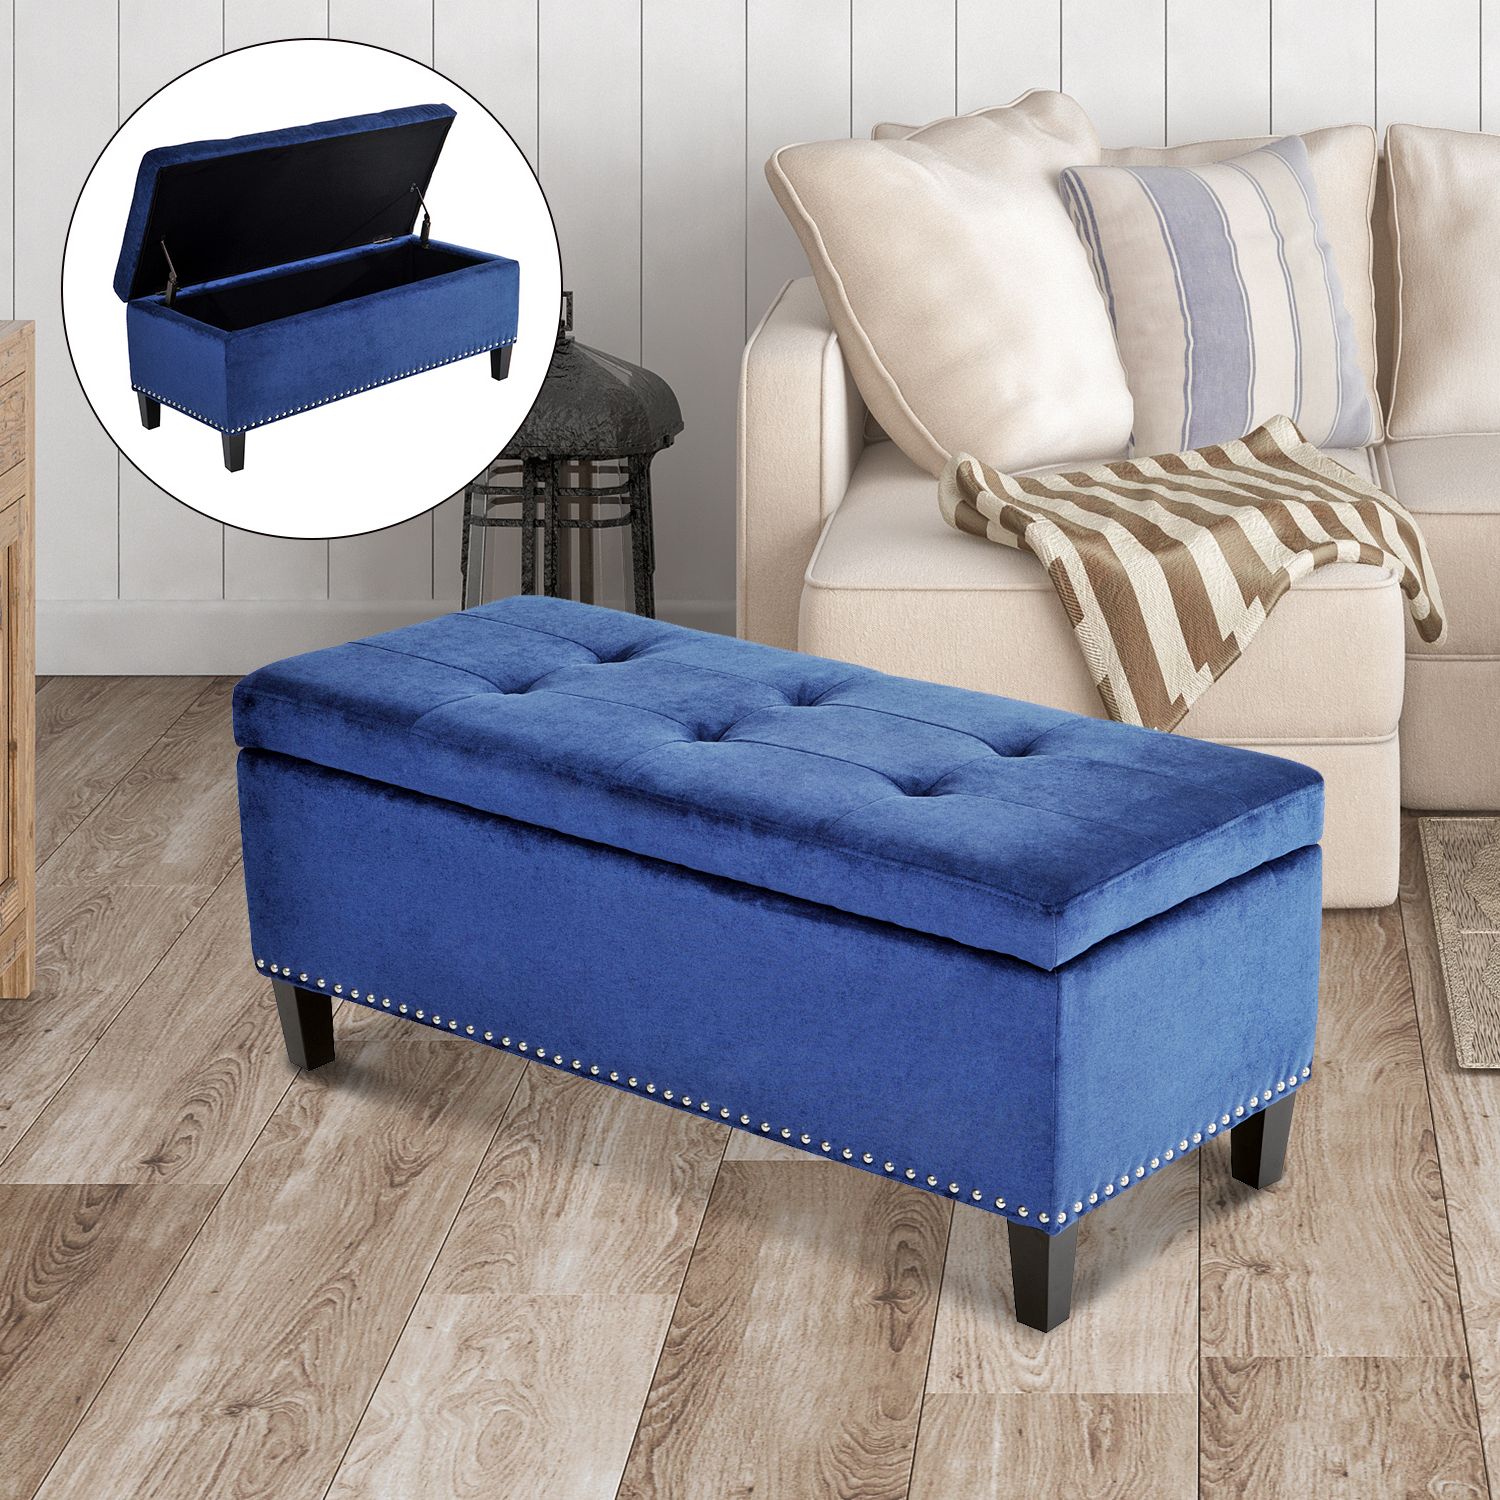 Most Popular 42" Contemporary Tufted Top Storage Ottoman Bench Velvet Fabric Home Intended For Gray Velvet Tufted Storage Ottomans (View 10 of 10)